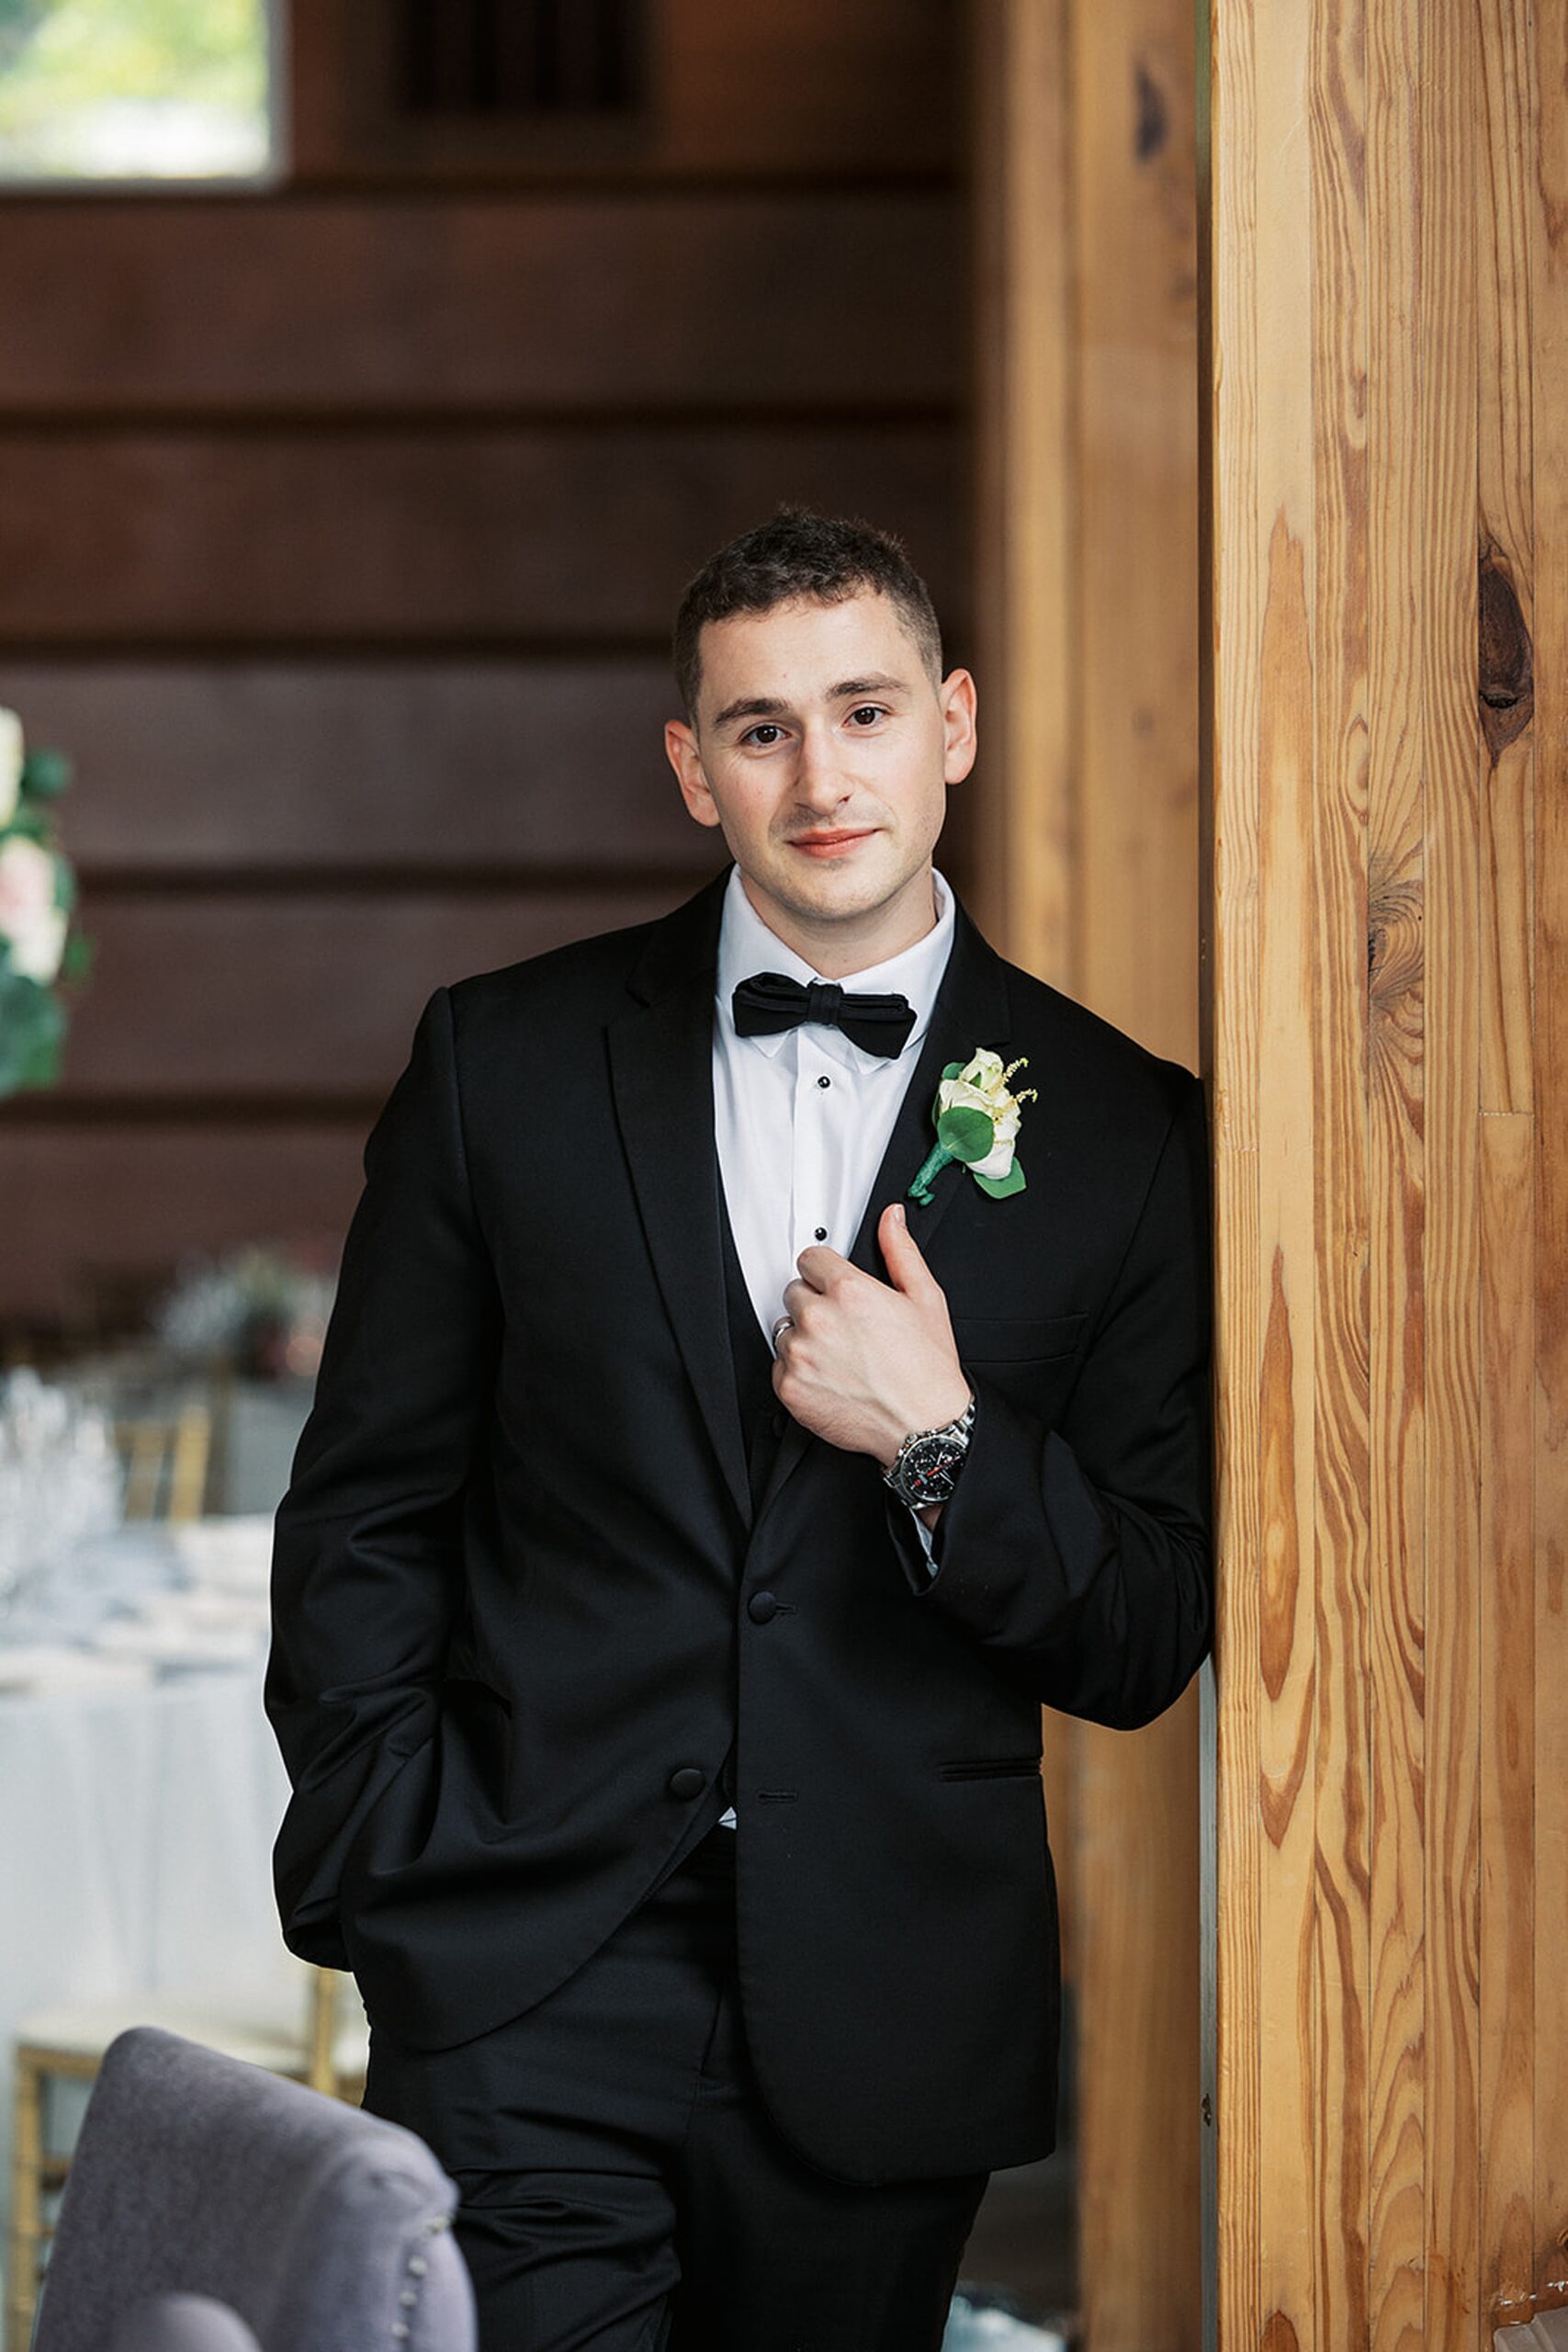 A groom leans against a wooden beam in a wedding reception venue wearing a black suit